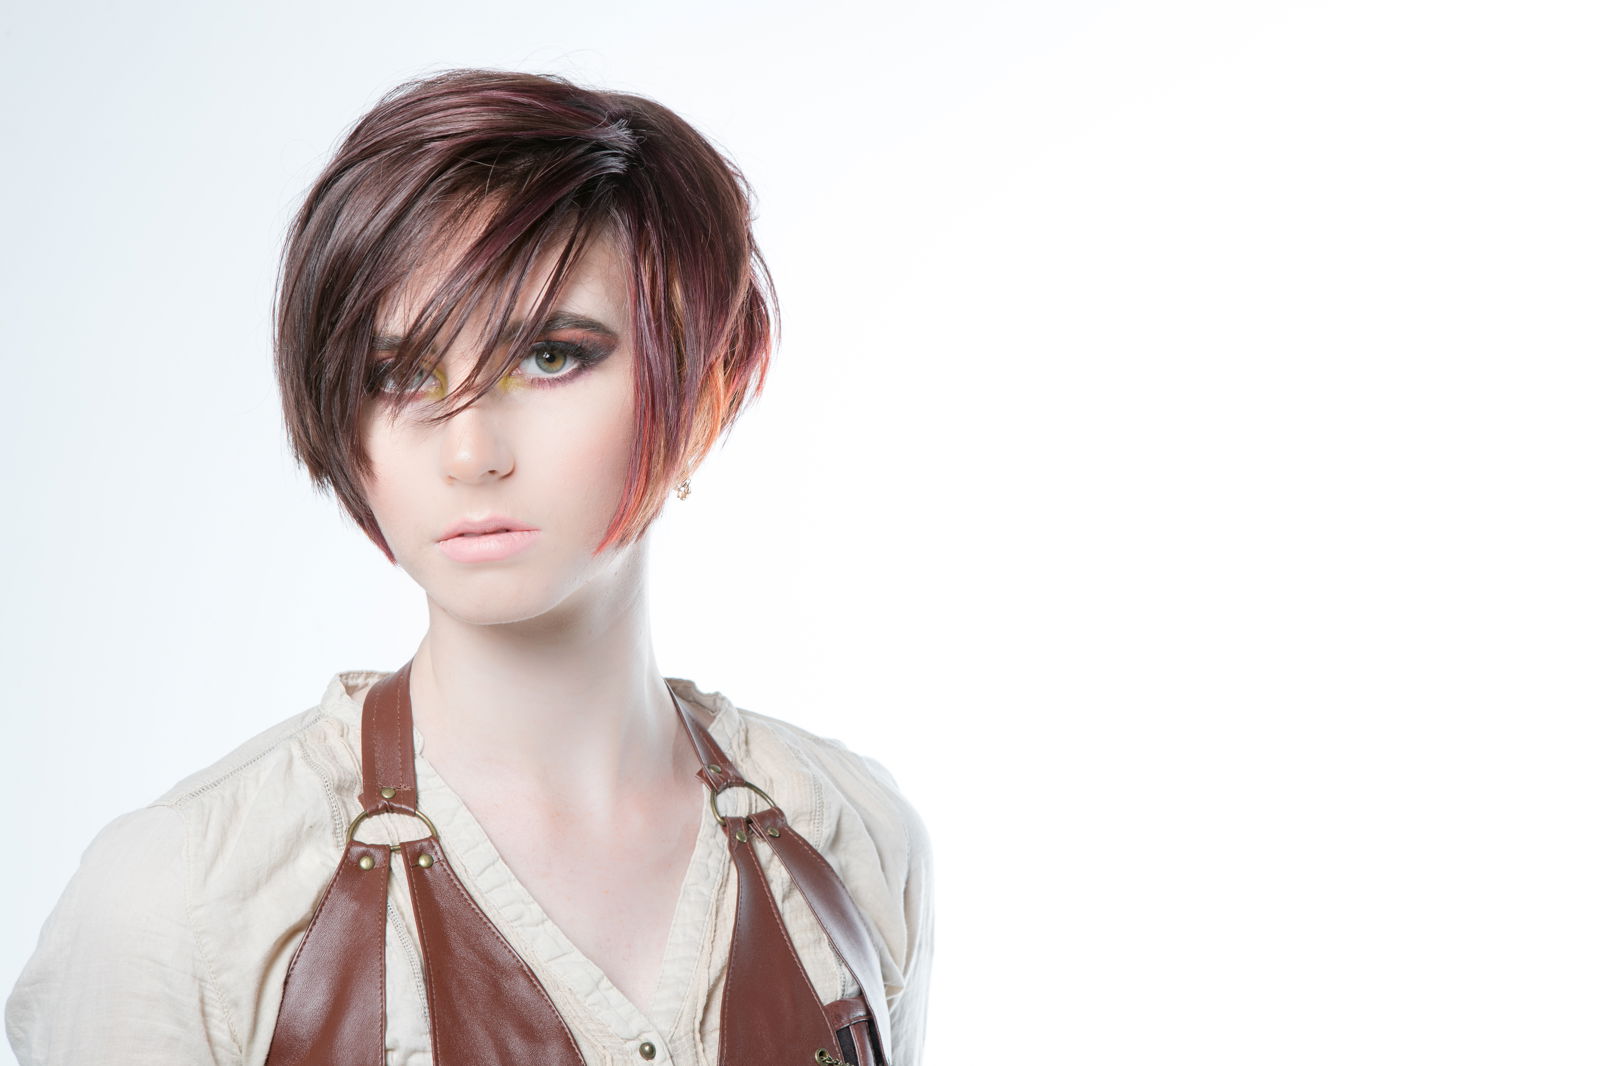 Model with a pixie cut that has orange highlights at the ends